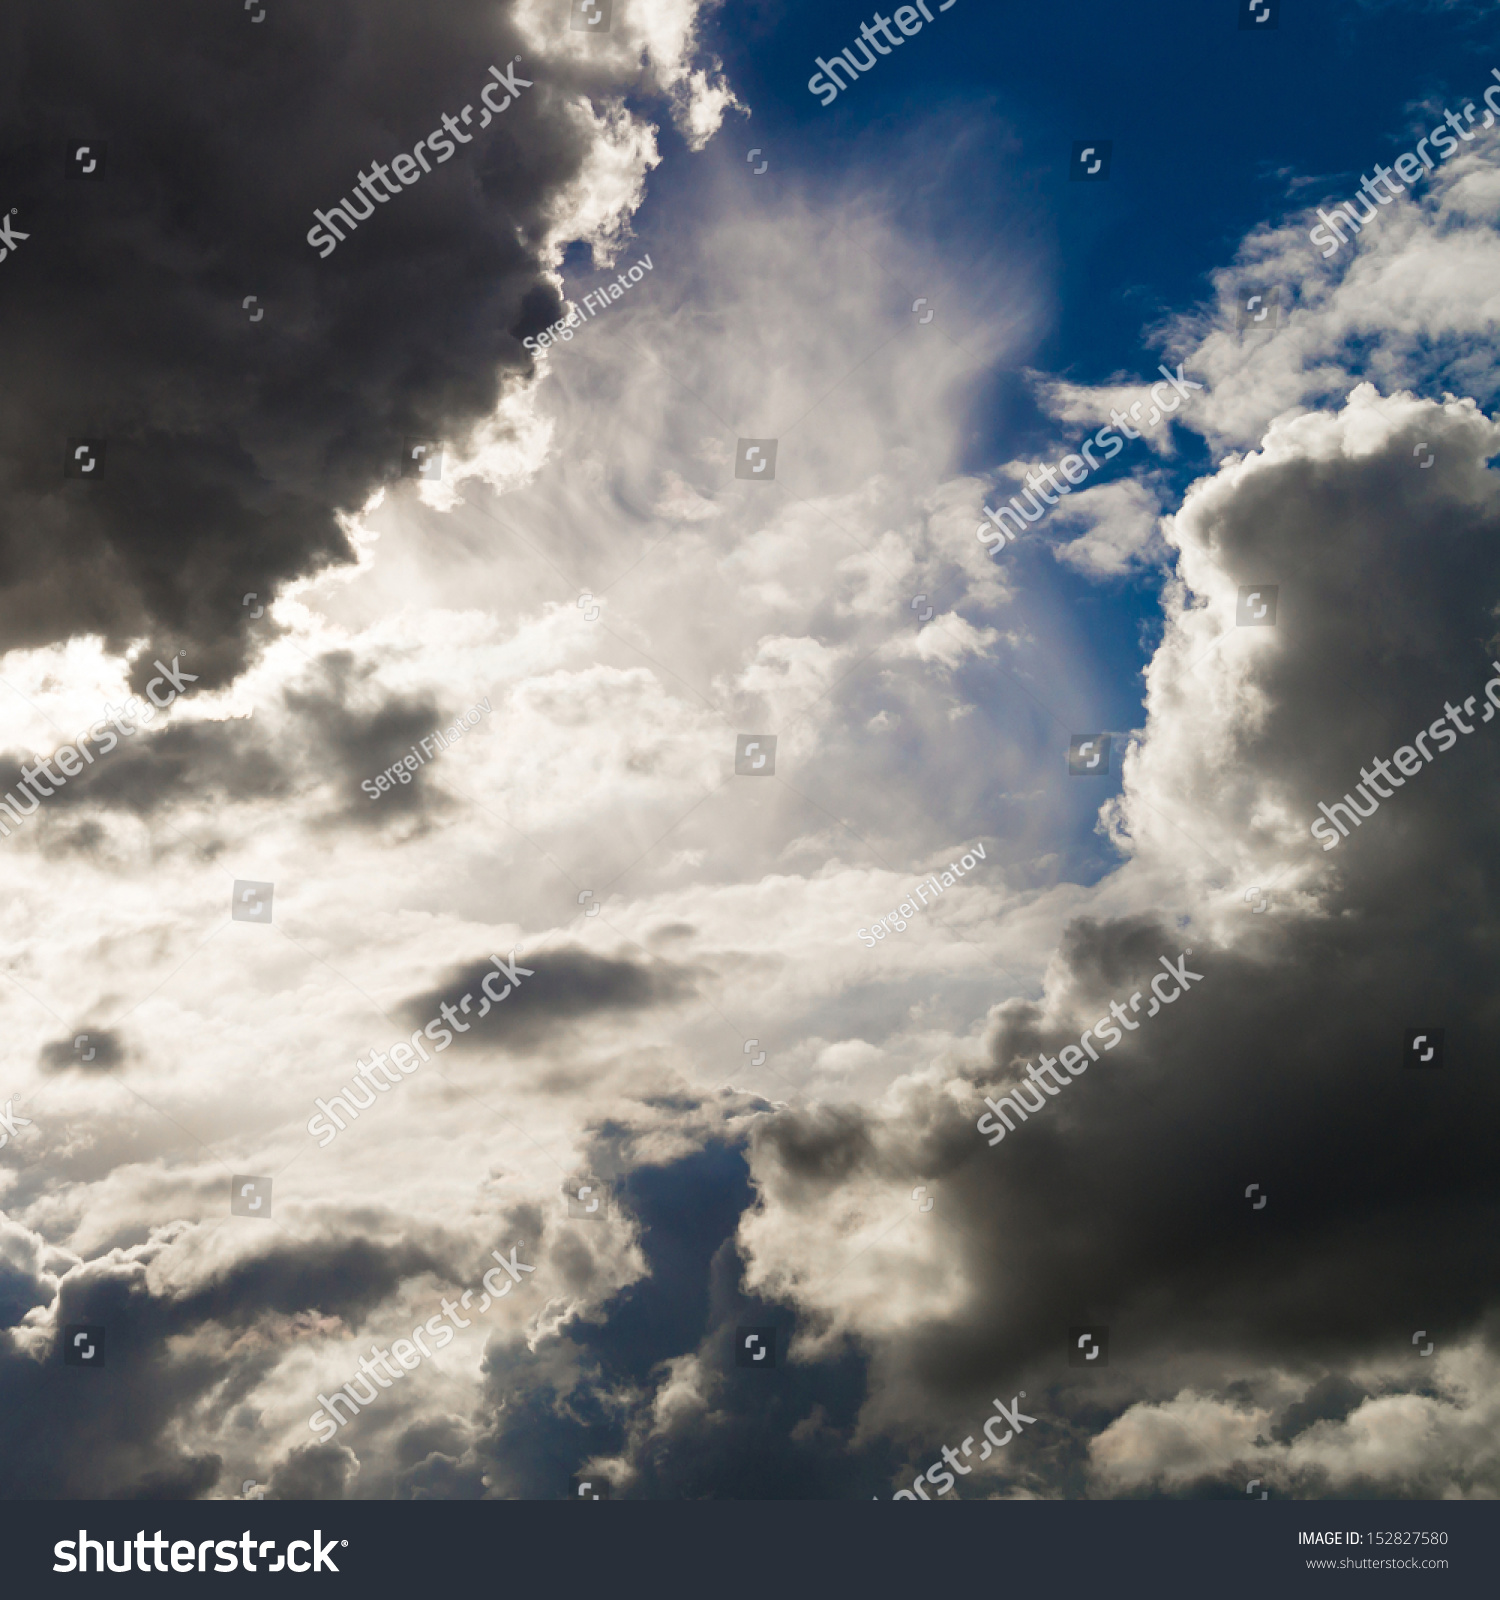 Dense Massive Clouds Cloudy Weather Stock Photo 152827580 - Shutterstock